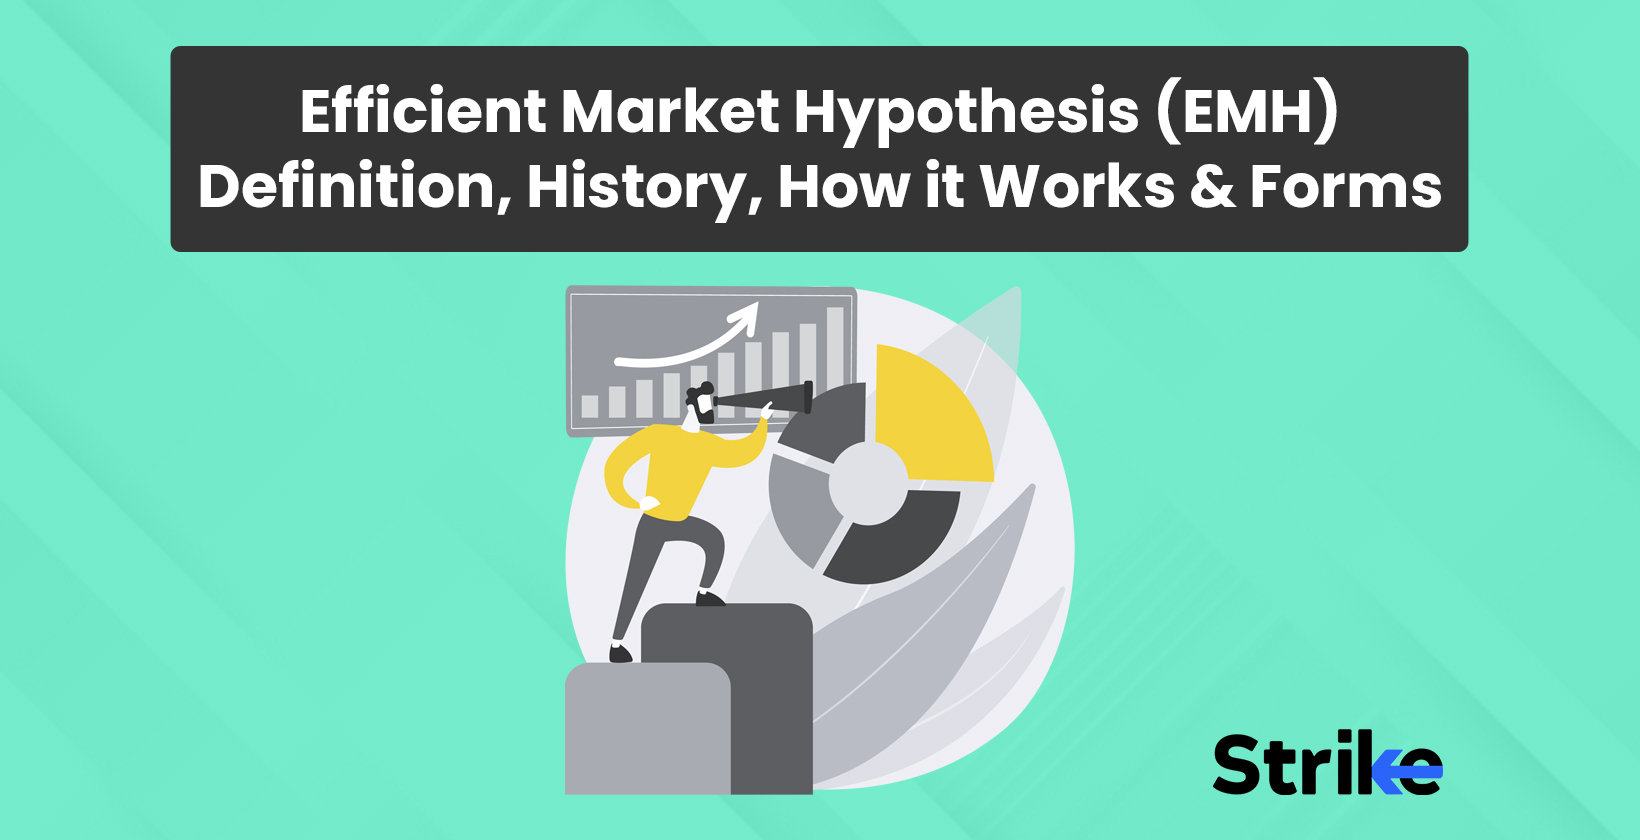 Efficient Market Hypothesis (EMH): Definition, History, How it Works, and Different Forms